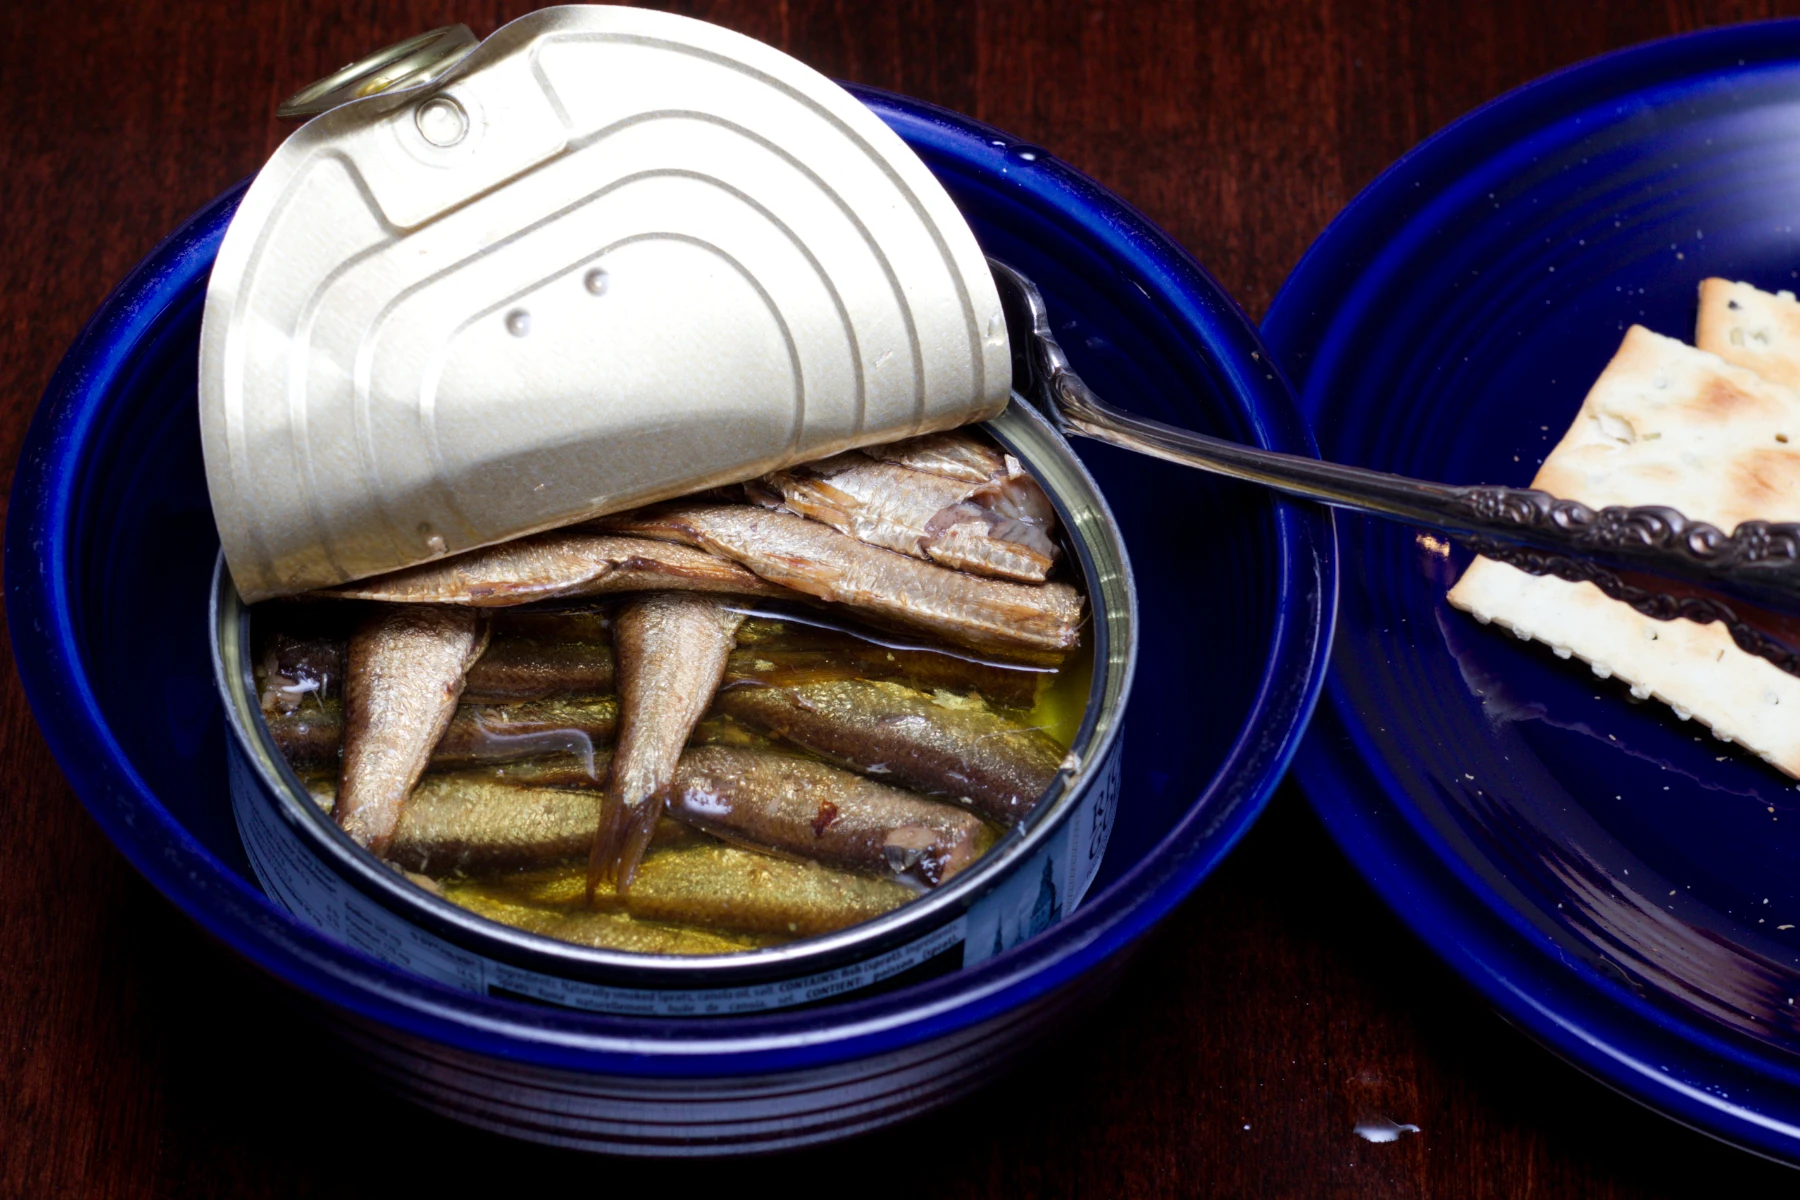 A half-eaten can of sprats with oil.